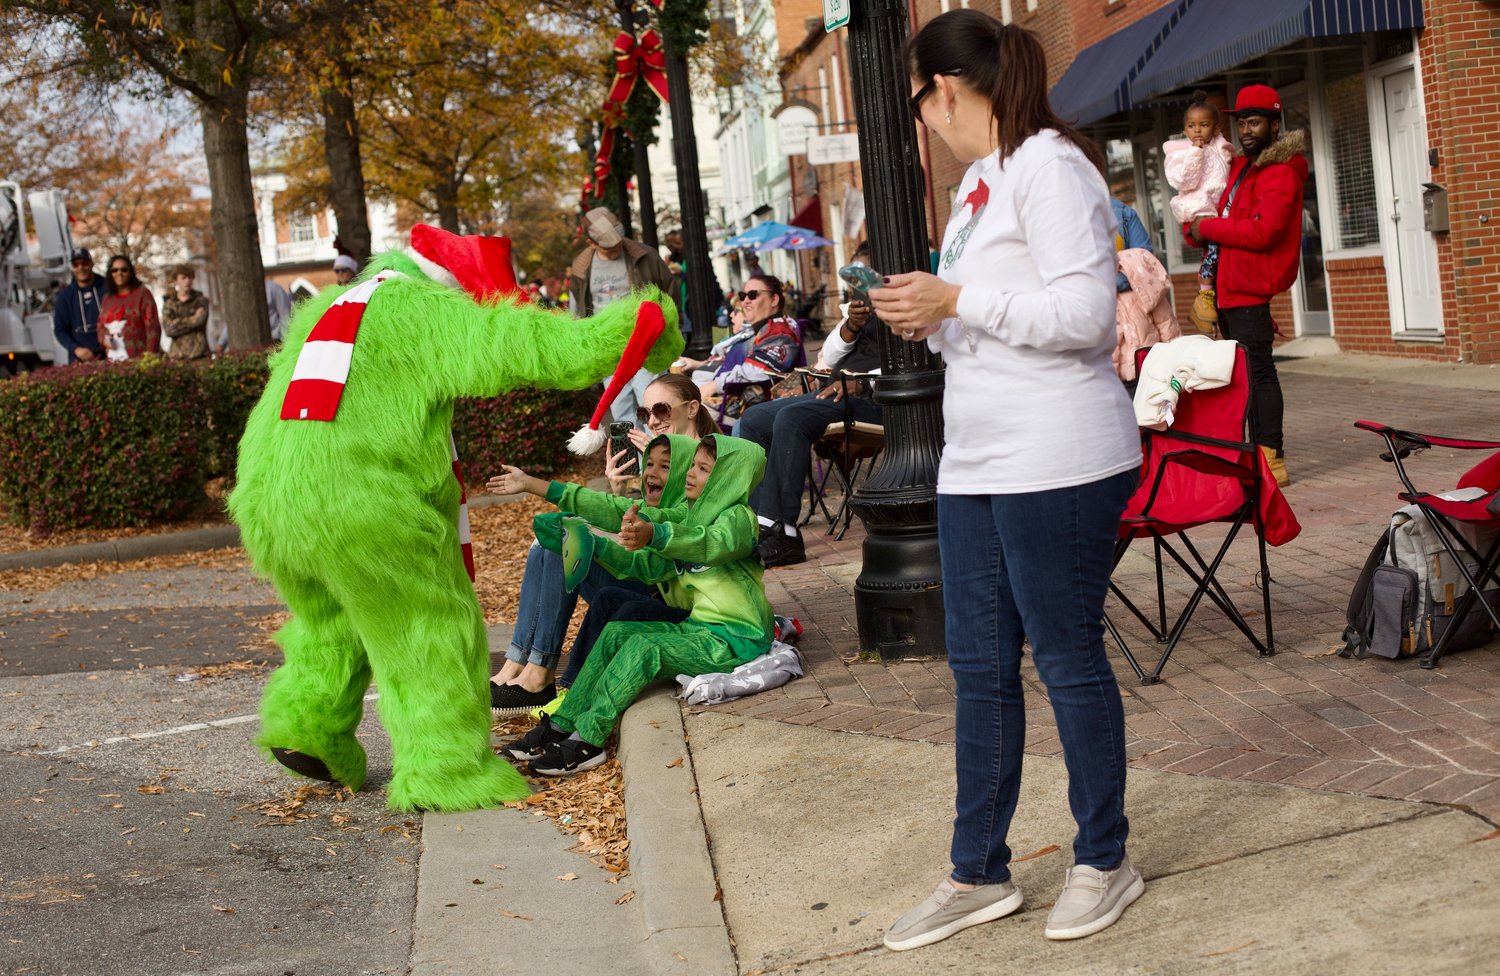 The Grinch interacts with children along the parade route.